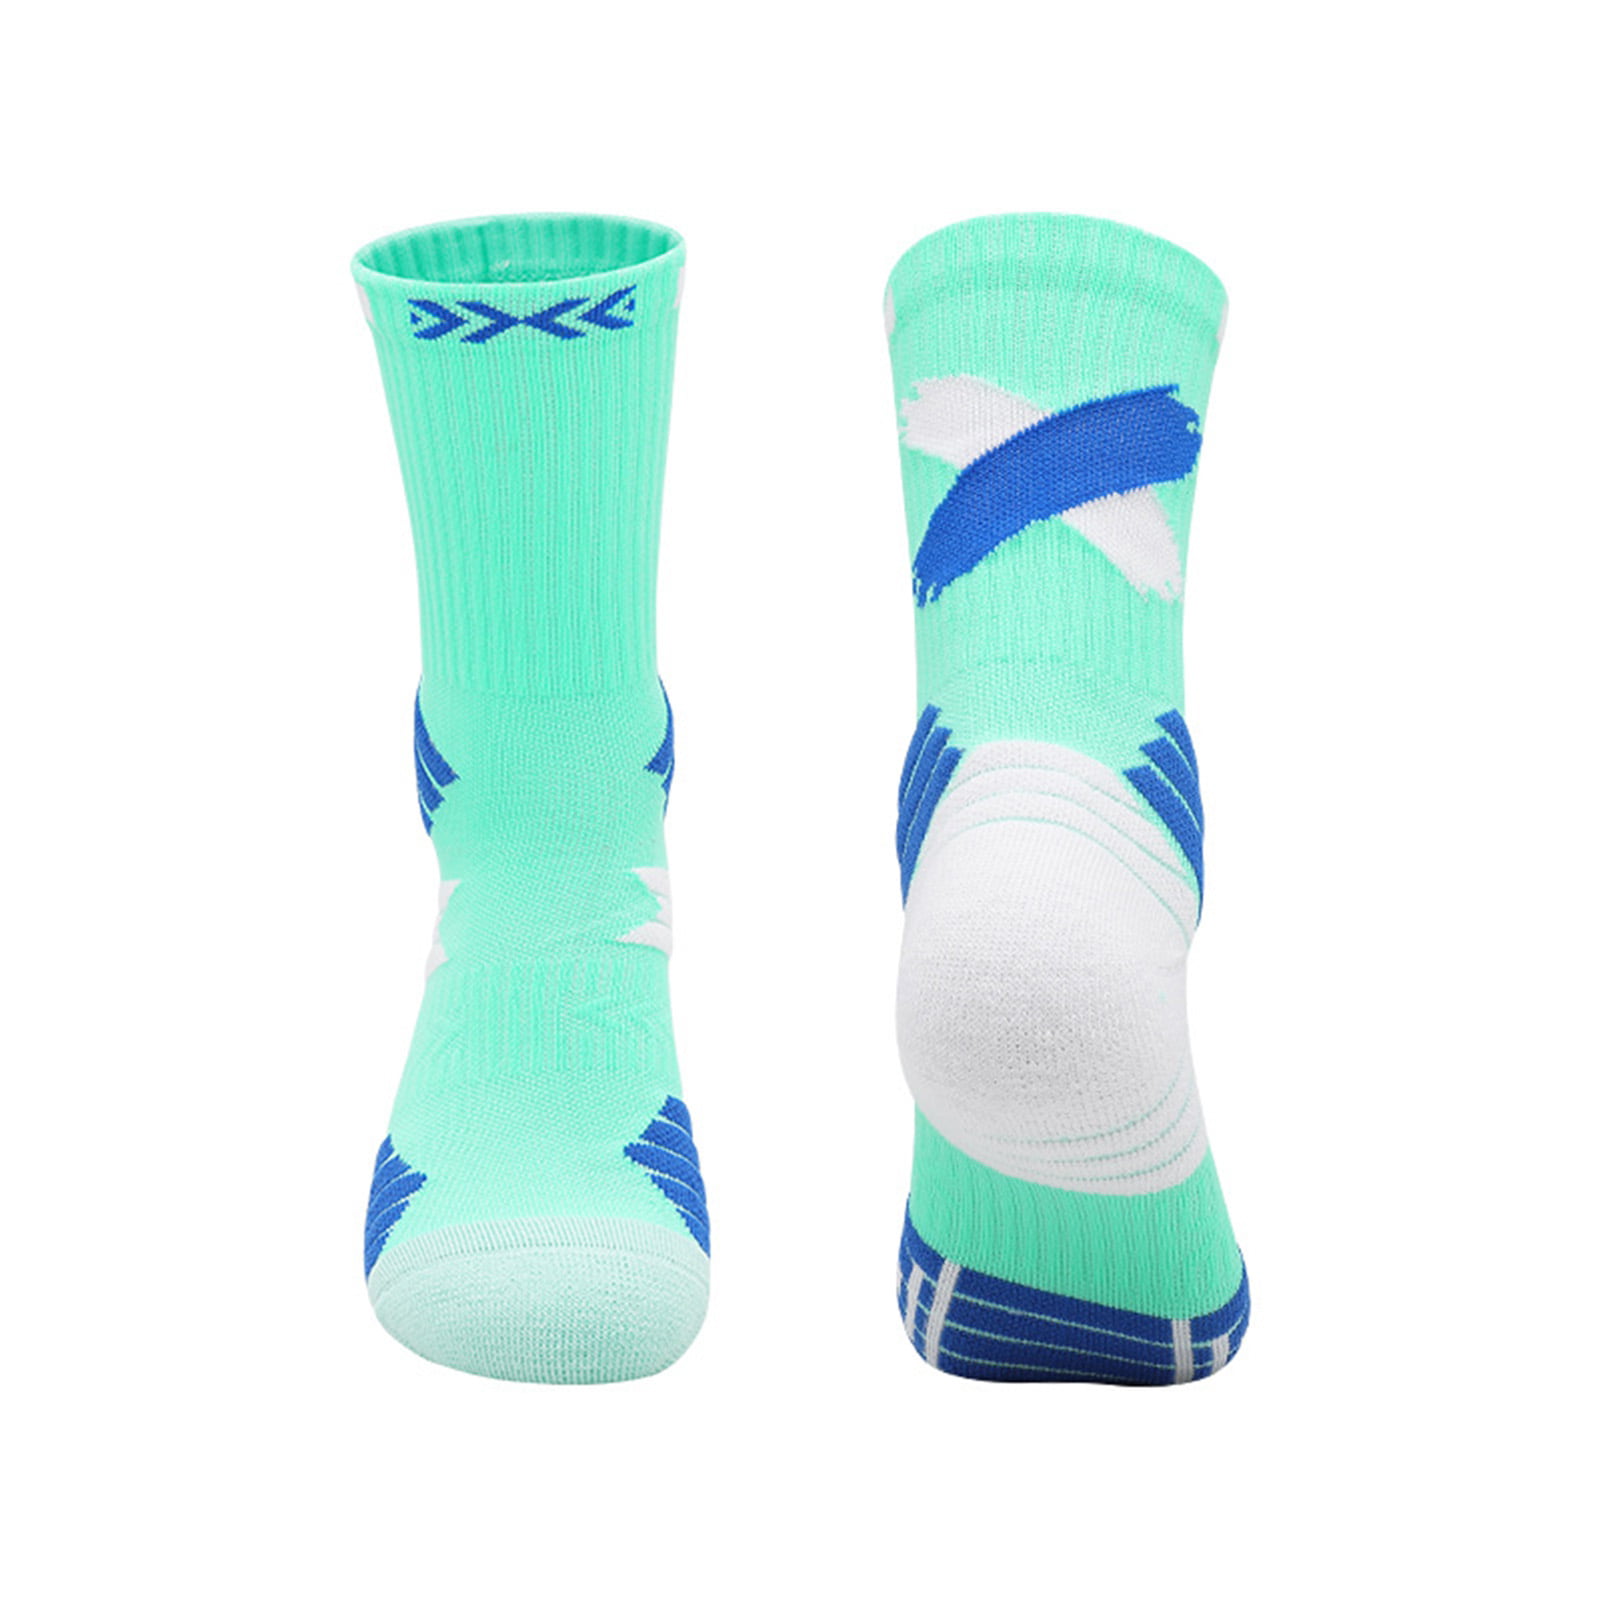 Chaussettes Footshop The Basketball Socks Gray Camo